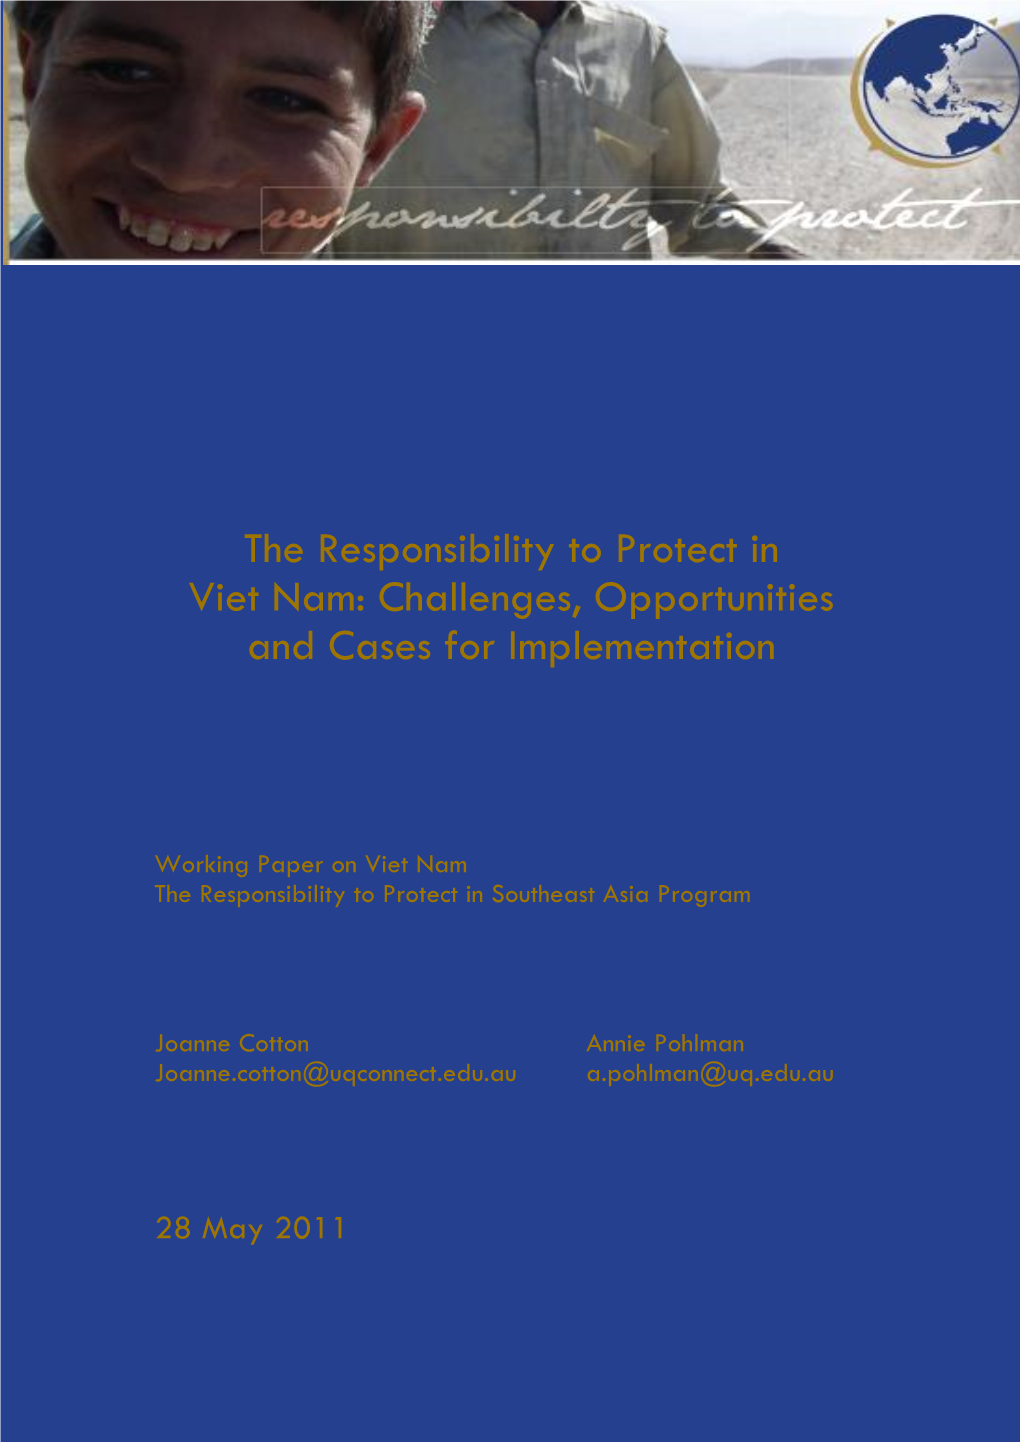 The Responsibility to Protect in Viet Nam: Challenges, Opportunities and Cases for Implementation